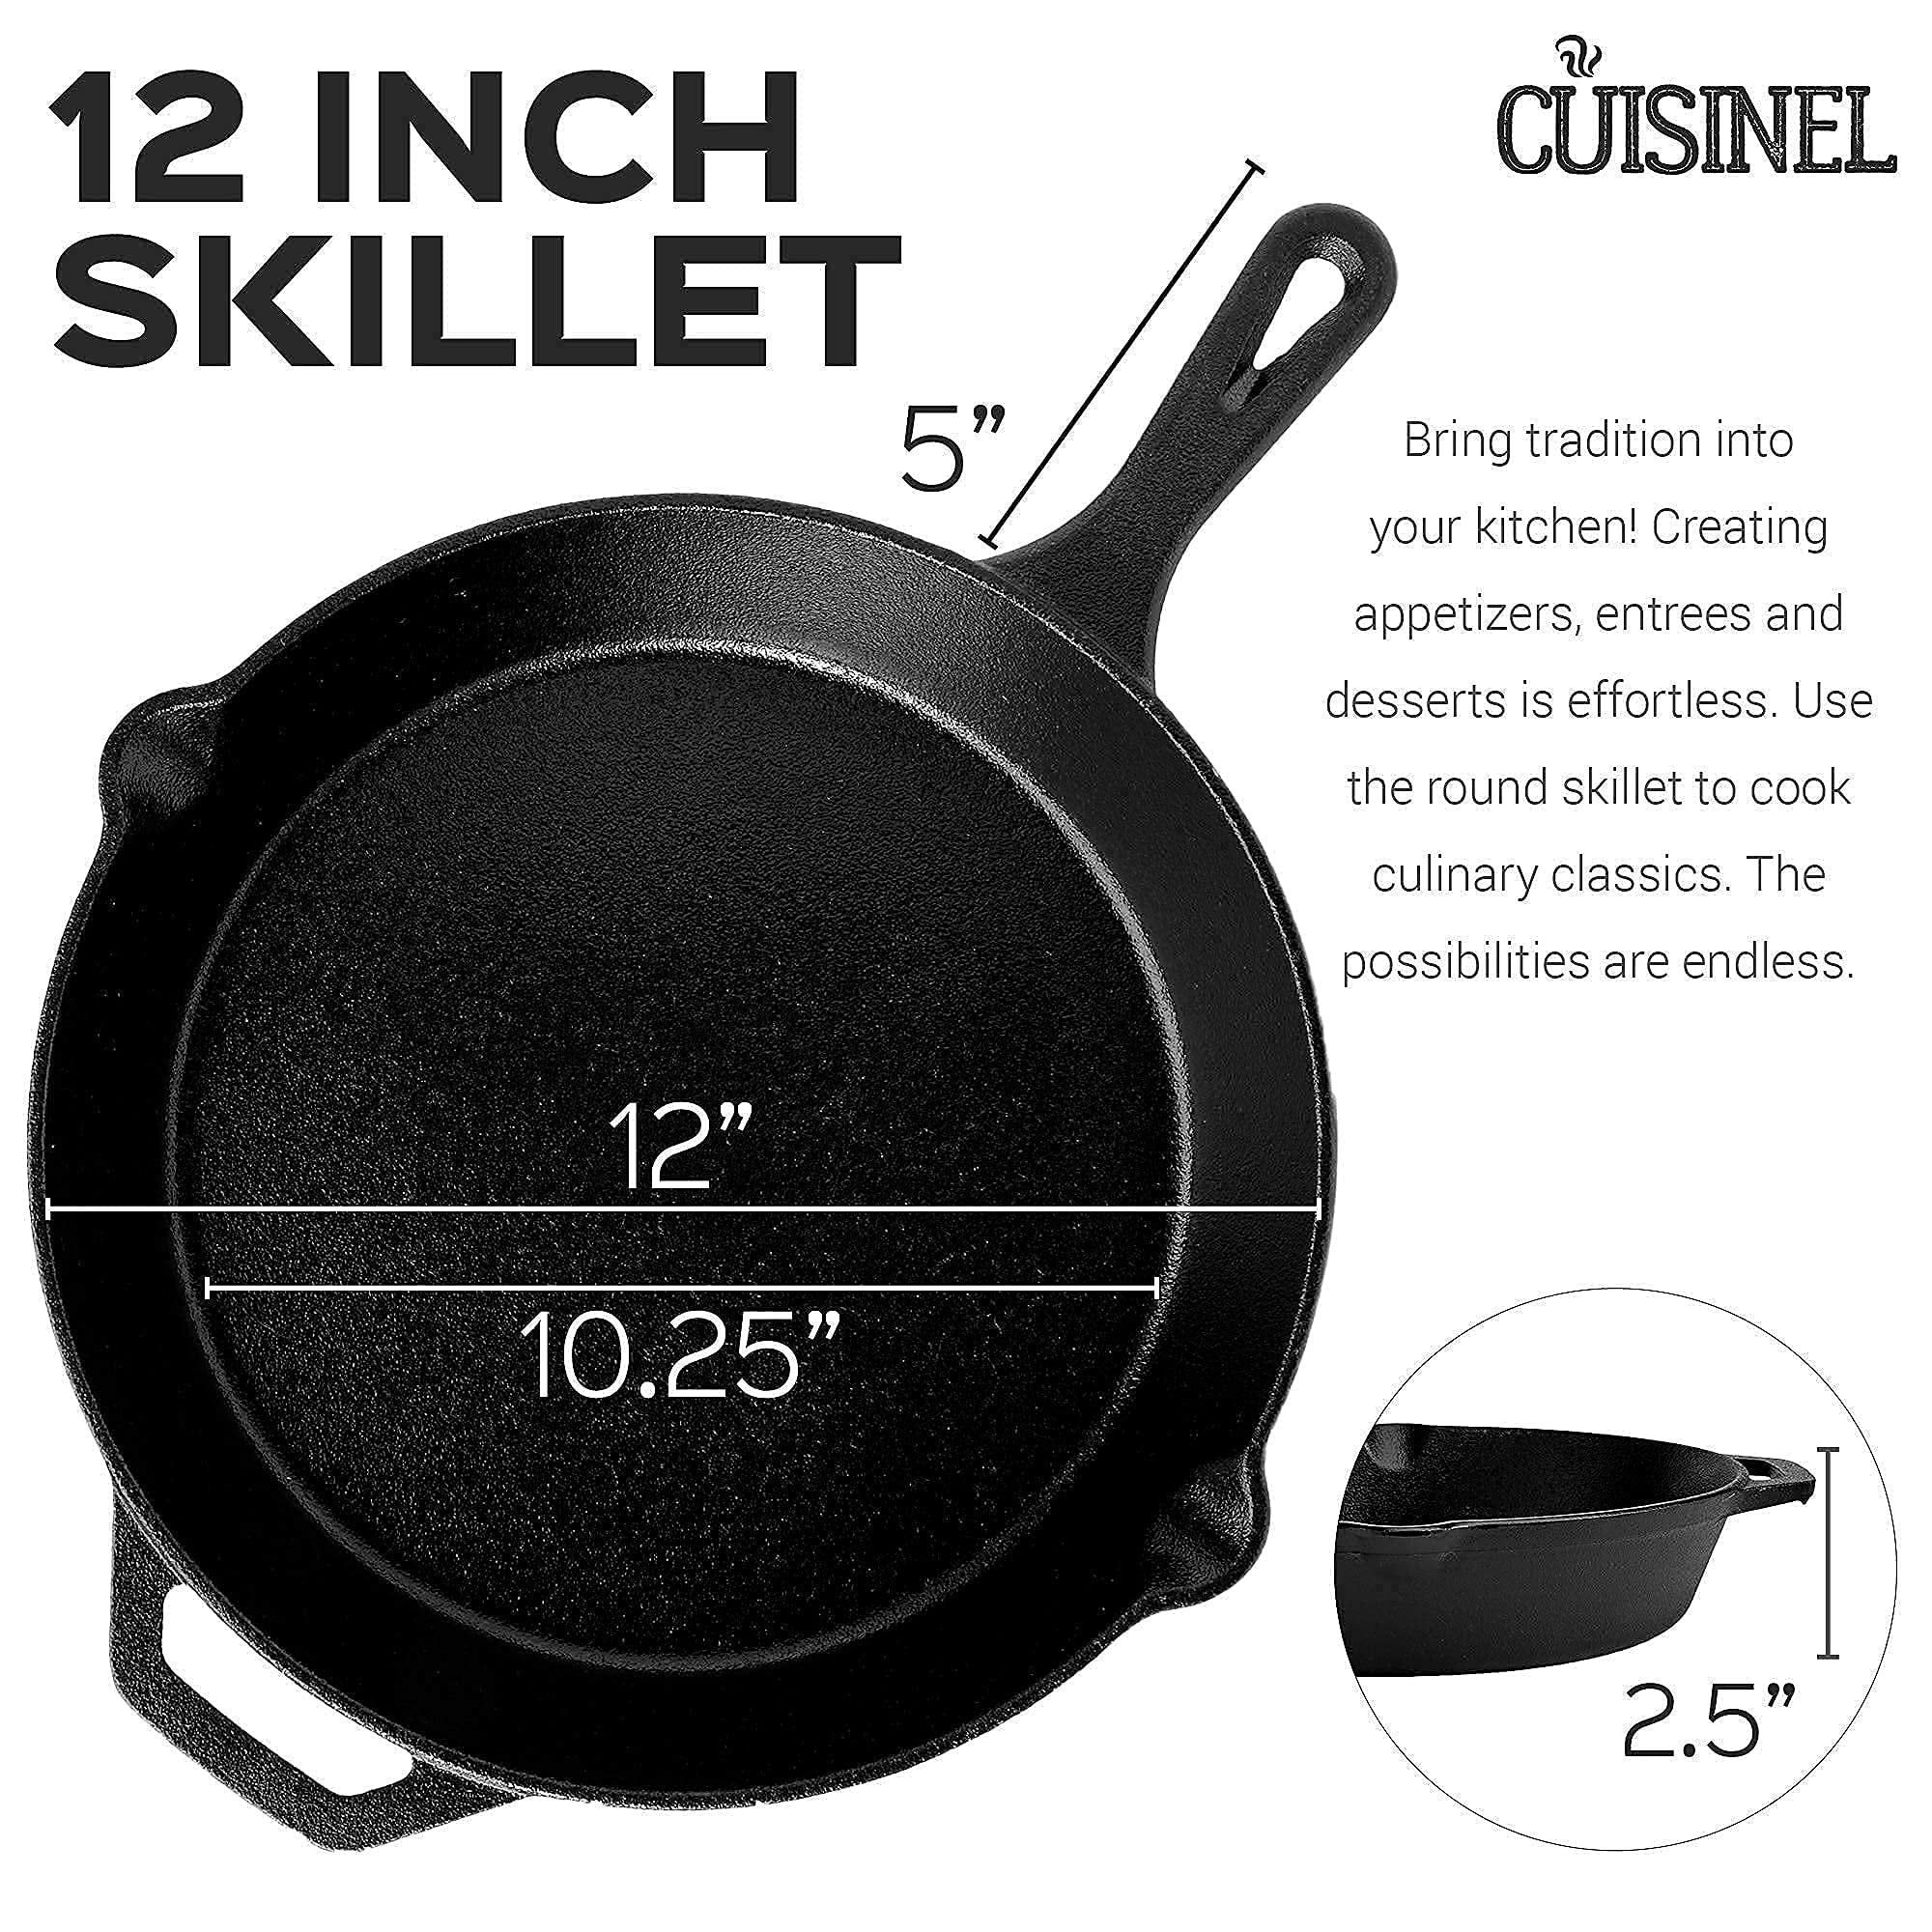 Cuisinel Cast Iron Skillet - 12"-Inch + Glass Lid + Silicone Handle Cover - Preseasoned Oven Safe Cookware - Heat-Resistant Holder - Indoor and Outdoor Use - Grill, Stovetop, Induction Safe